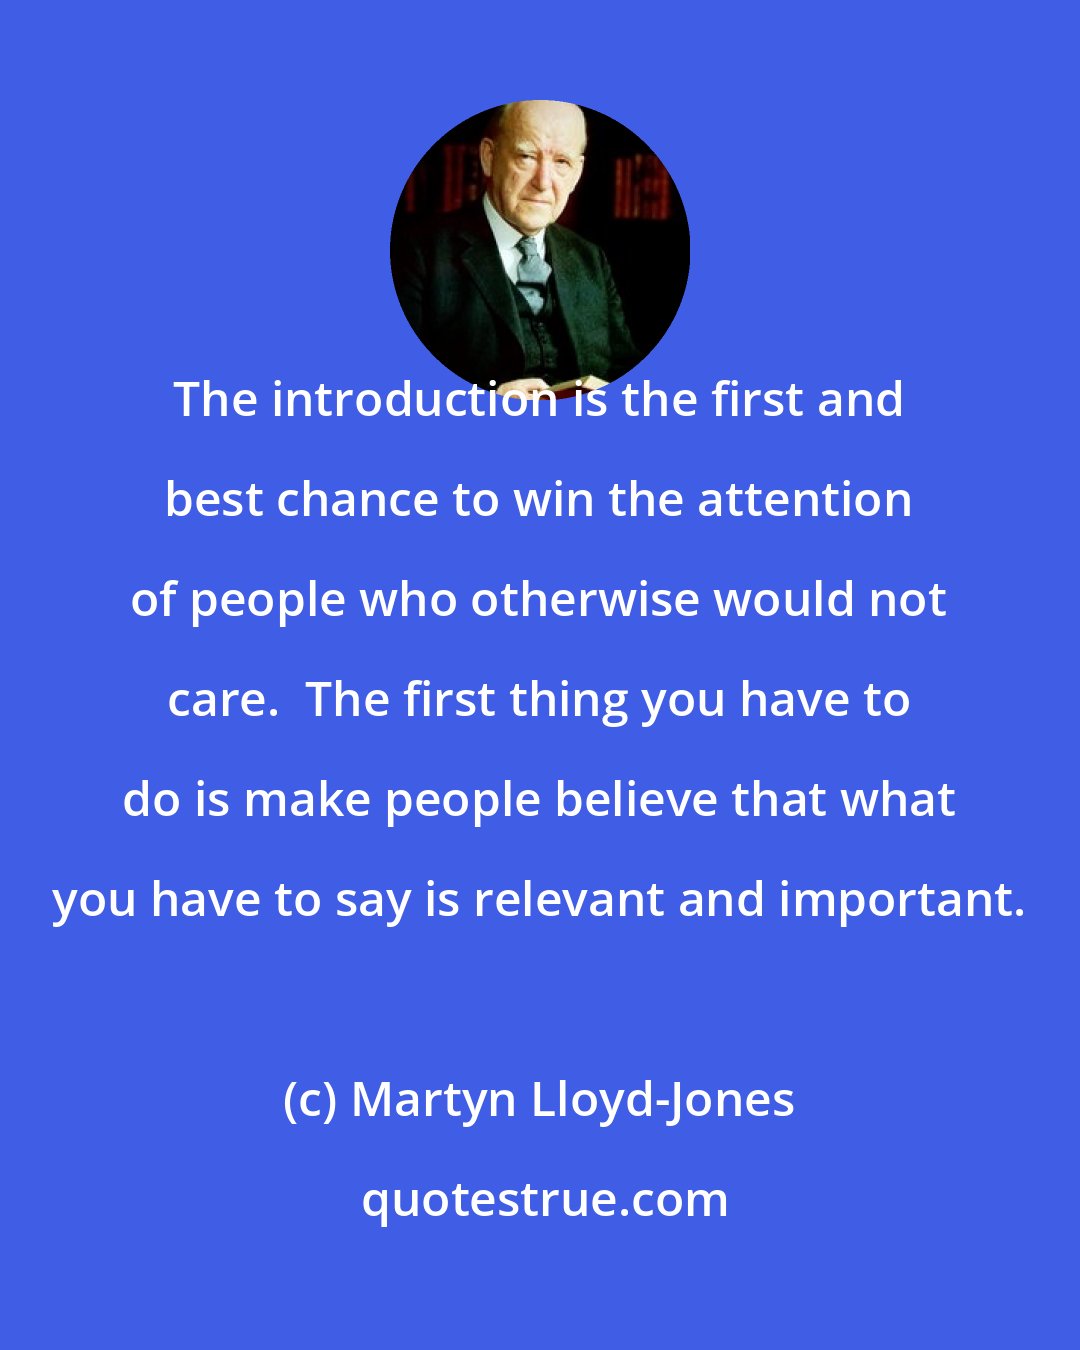 Martyn Lloyd-Jones: The introduction is the first and best chance to win the attention of people who otherwise would not care.  The first thing you have to do is make people believe that what you have to say is relevant and important.